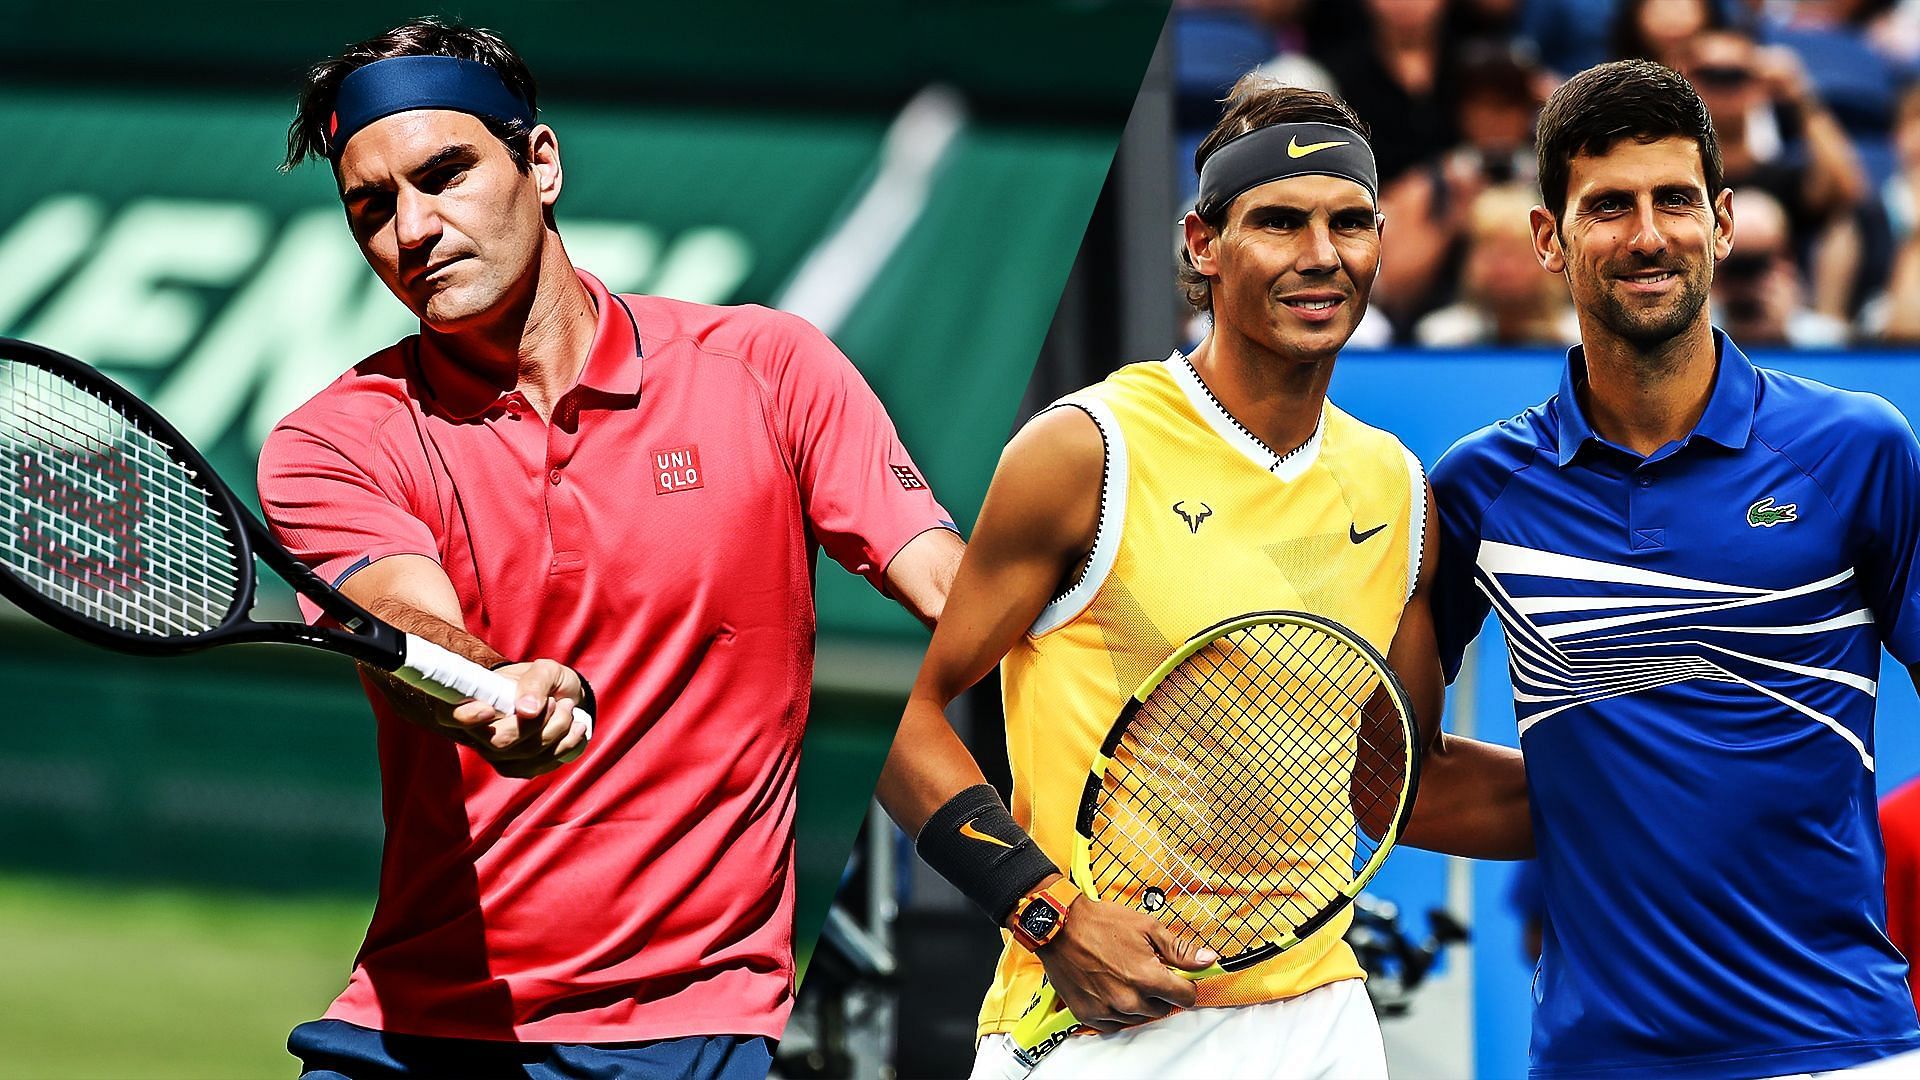 Roger Federer is the greatest of all time ahead of his rivals Rafael Nadal and Novak Djokovic﻿.